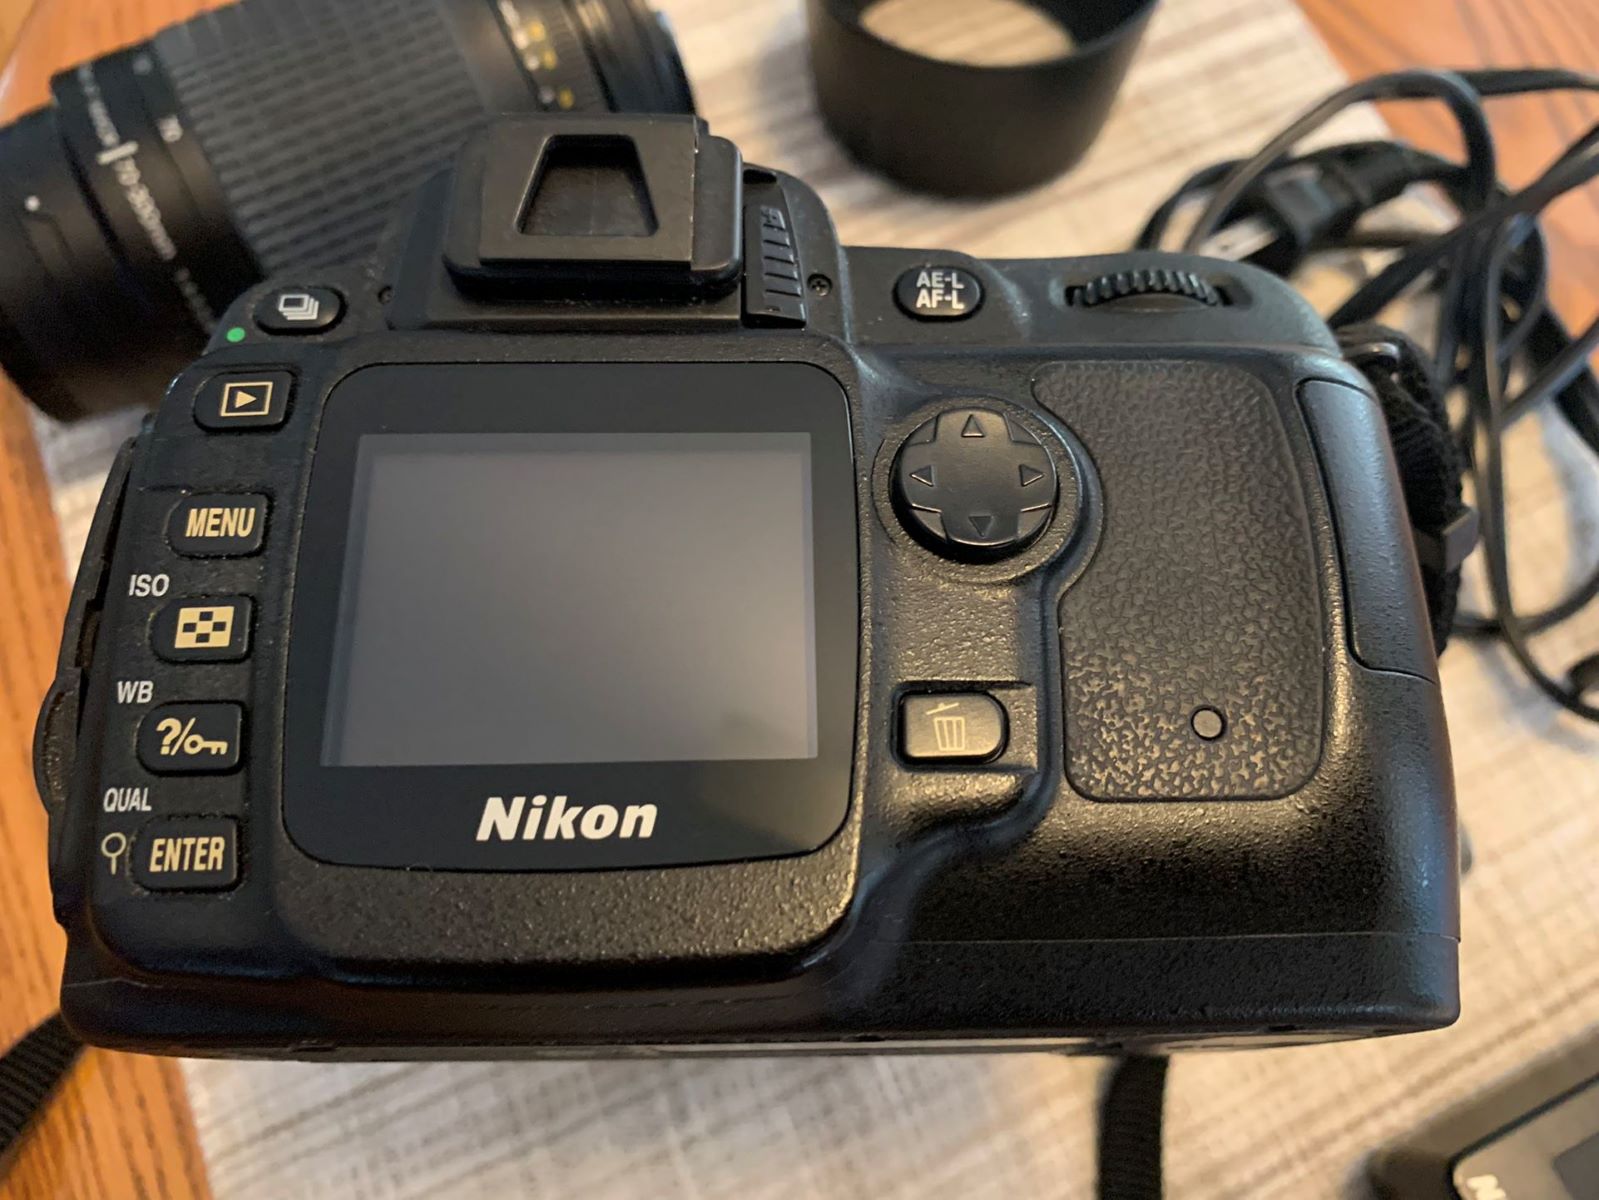 What Kind Of Sd Card Do I Use In A Nikon D50 DSLR Camera With Quantaray 70-300Mm